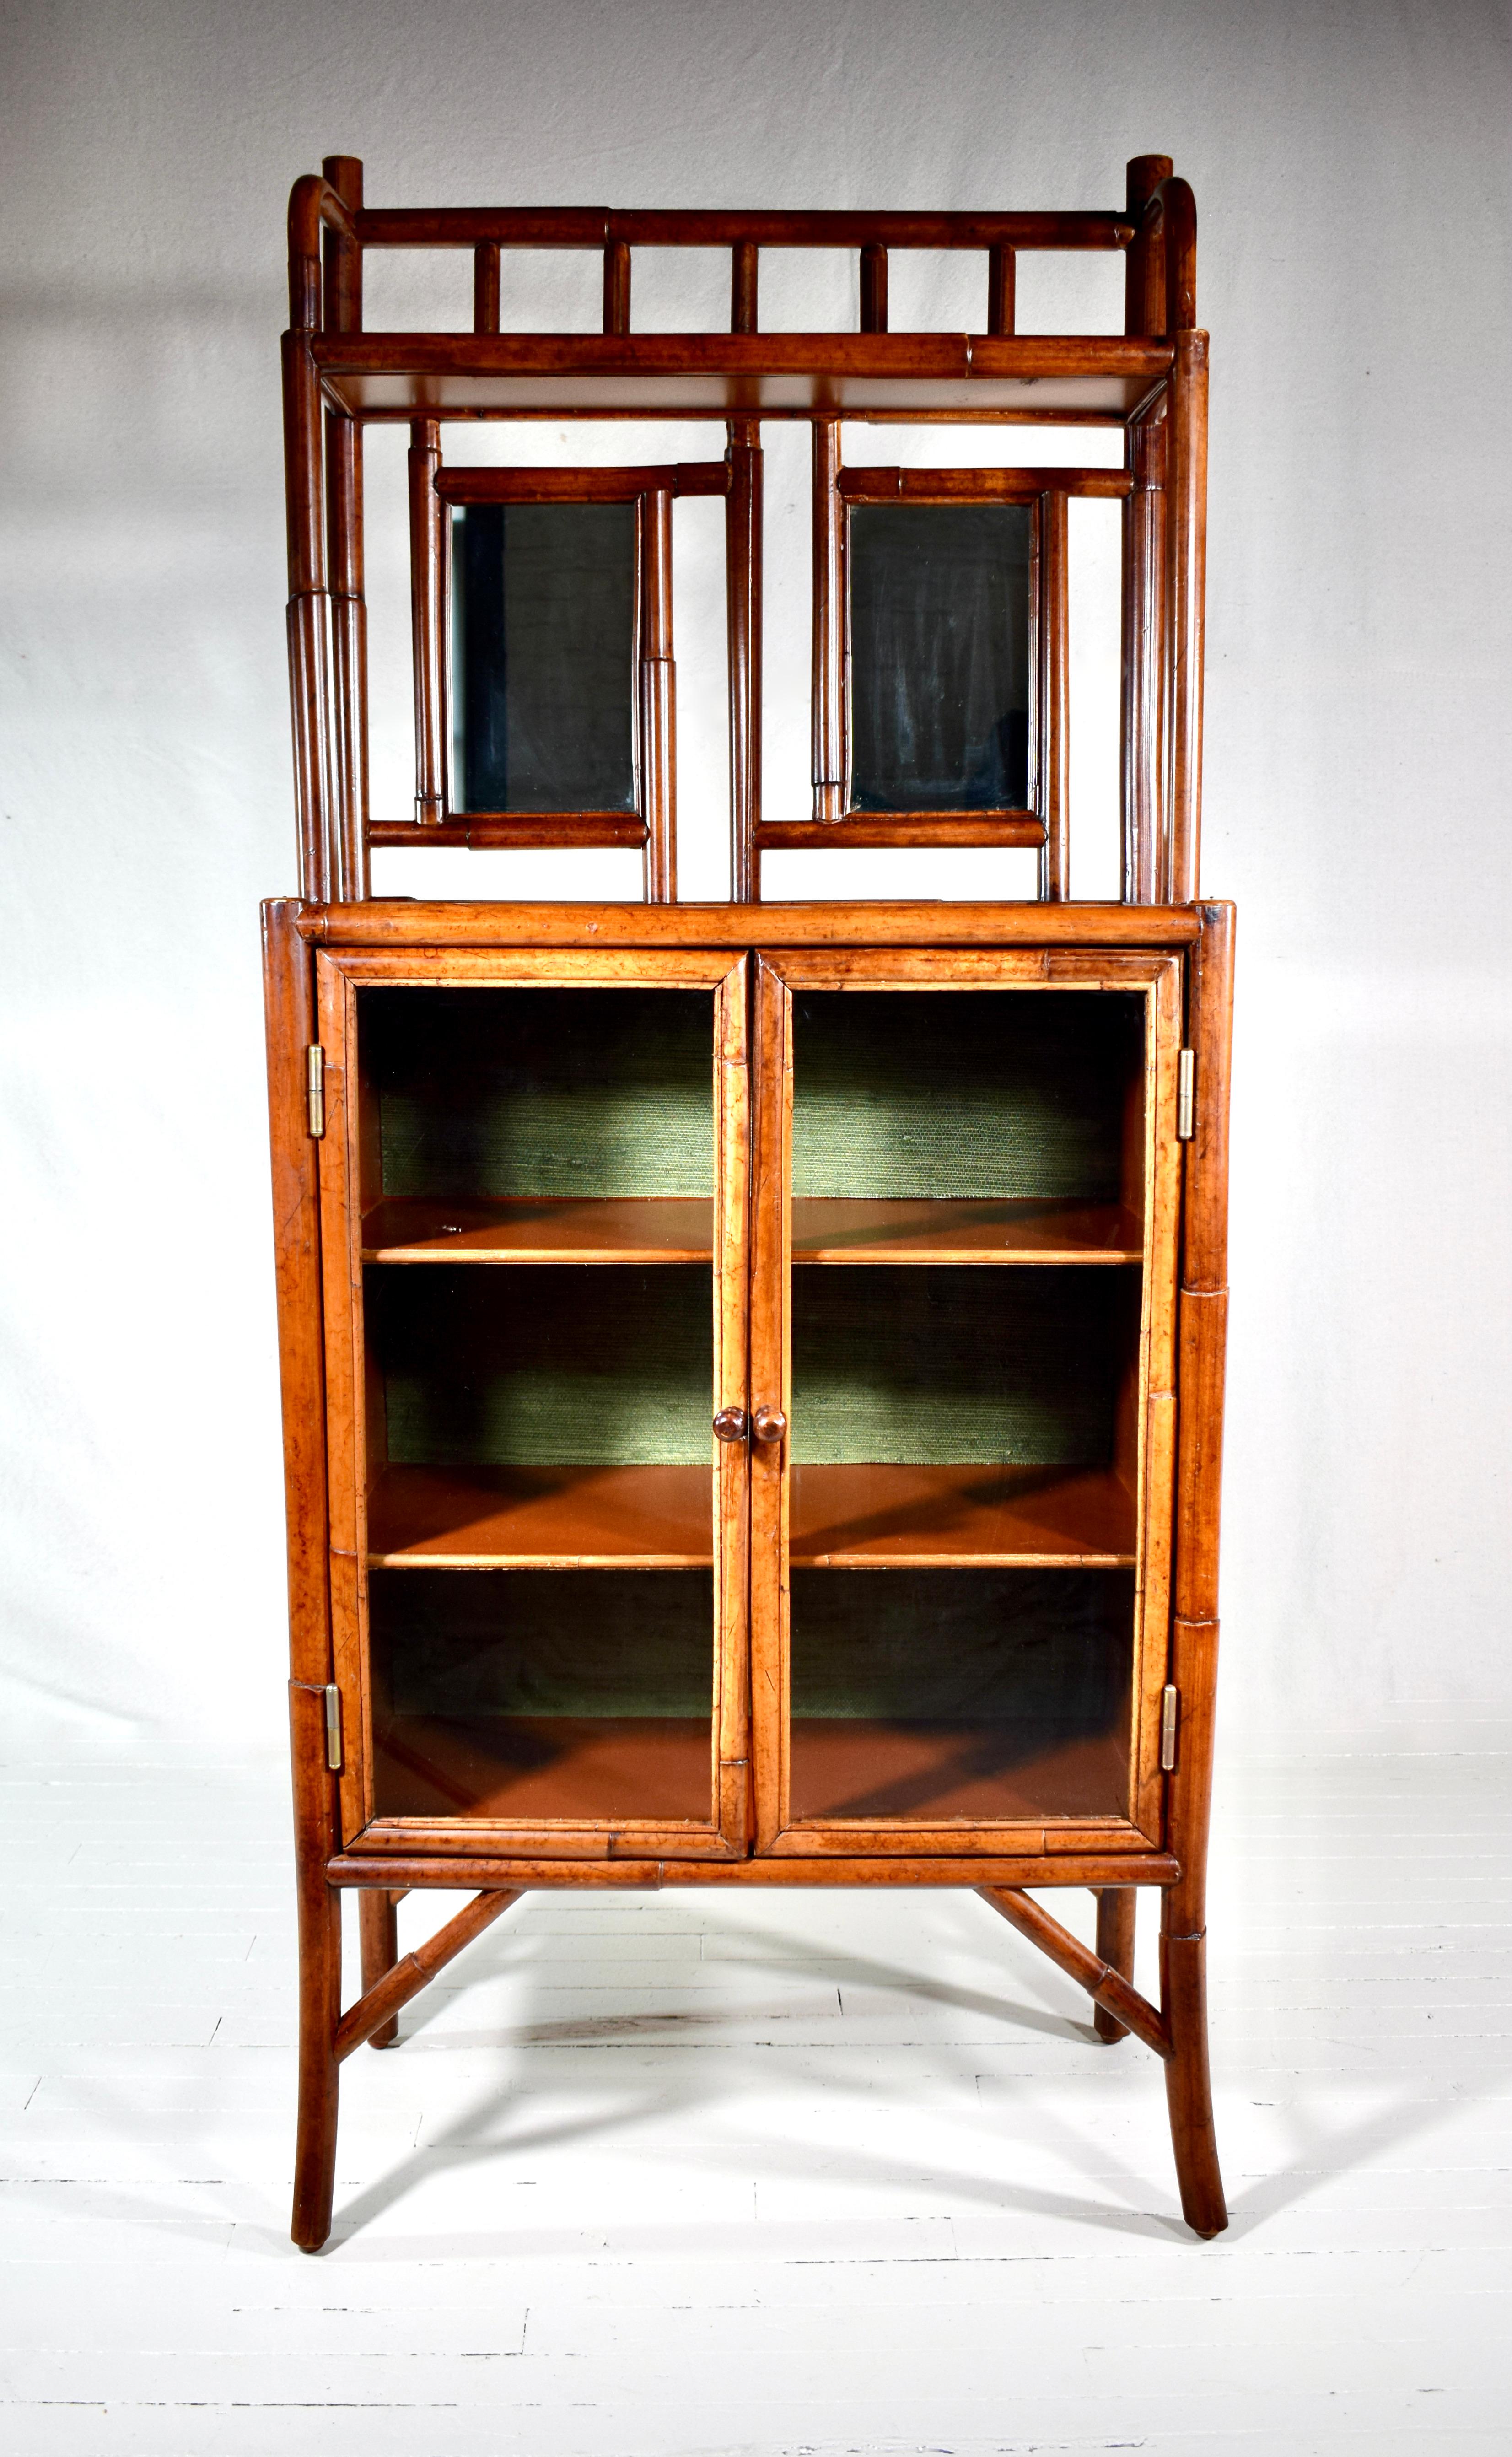 A Faux bamboo British Colonial style etagere with mirror detailing, fixed interior shelves behind two glass doors; enhanced with green grasscloth interior. Multifunctional for storage and display options. Excellent vintage condition; circa 1990's